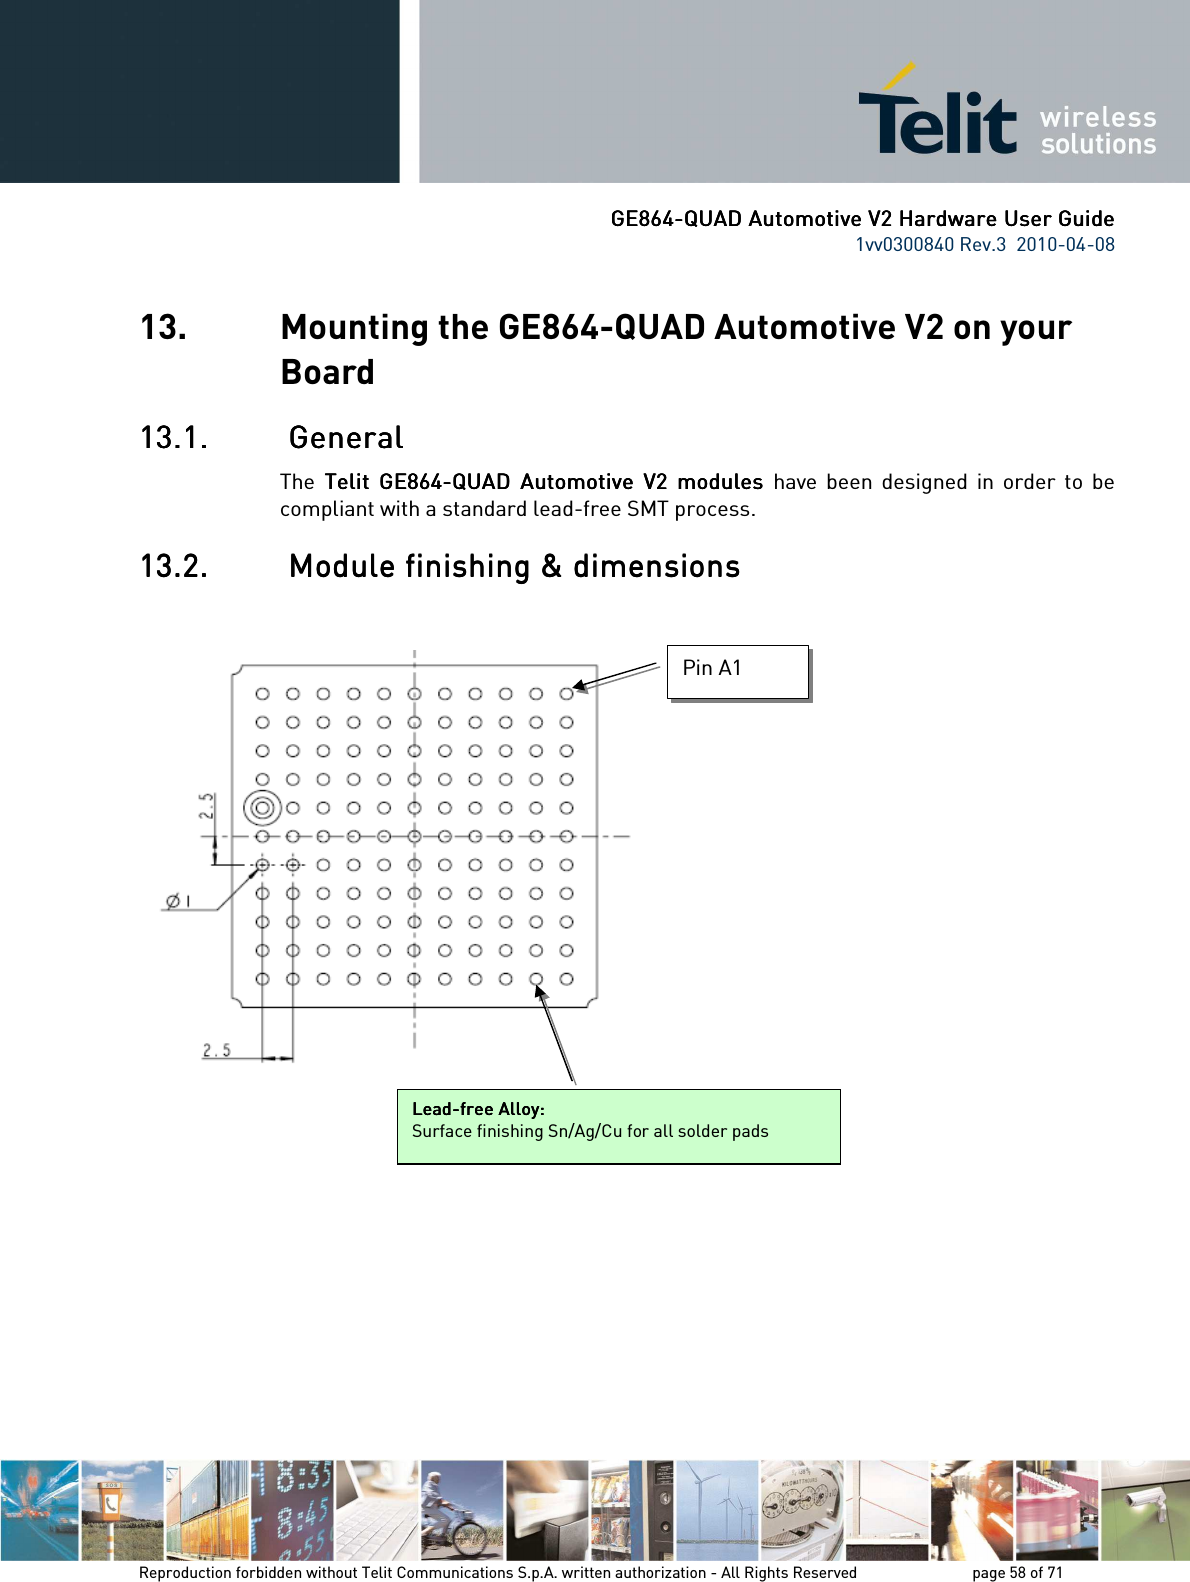      GE864GE864GE864GE864----QUAD Automotive V2 Hardware User GuideQUAD Automotive V2 Hardware User GuideQUAD Automotive V2 Hardware User GuideQUAD Automotive V2 Hardware User Guide    1vv0300840 Rev.3  2010-04-08       Reproduction forbidden without Telit Communications S.p.A. written authorization - All Rights Reserved    page 58 of 71  13. Mounting the GE864-QUAD Automotive V2 on your Board 13.1.13.1.13.1.13.1.     GeneralGeneralGeneralGeneral    The  Telit   Telit   Telit   Telit  GE864GE864GE864GE864----QUAD  Automotive  VQUAD  Automotive  VQUAD  Automotive  VQUAD  Automotive  V2222  modules   modules   modules   modules  have  been  designed  in  order  to  be compliant with a standard lead-free SMT process. 13.2.13.2.13.2.13.2.     Module finishing &amp; dimensionsModule finishing &amp; dimensionsModule finishing &amp; dimensionsModule finishing &amp; dimensions                   LeadLeadLeadLead----free Alloy:free Alloy:free Alloy:free Alloy:    Surface finishing Sn/Ag/Cu for all solder pads Pin A1 